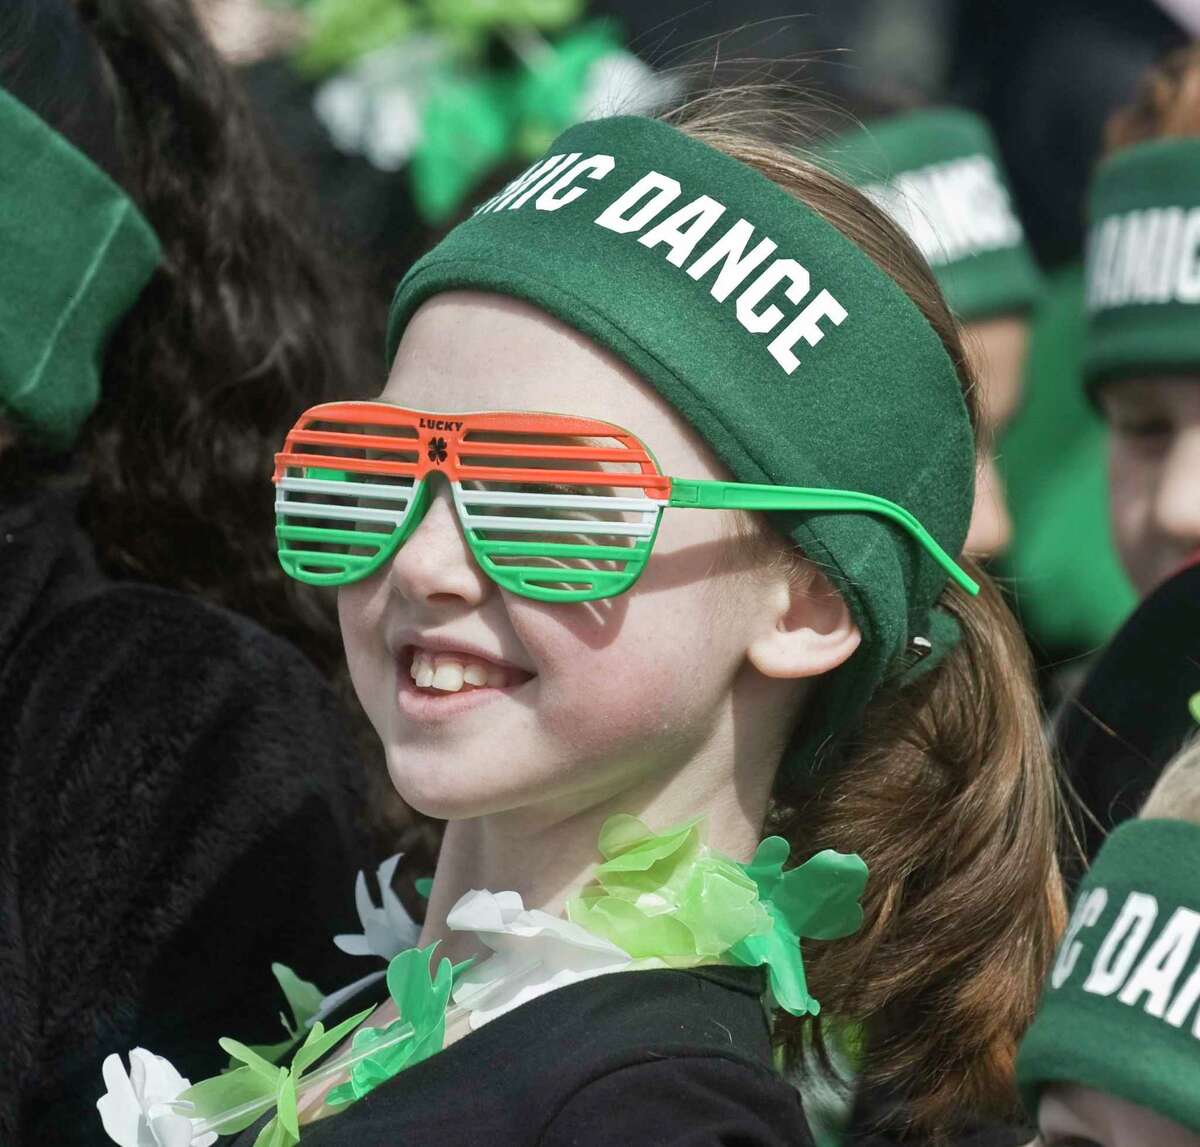 Maddy Fournier, 8 of Danbury Dynamic Dance and Fitness, waits to march in the Danbury St. Patrick's Day Parade. Sunday, March 24, 2019